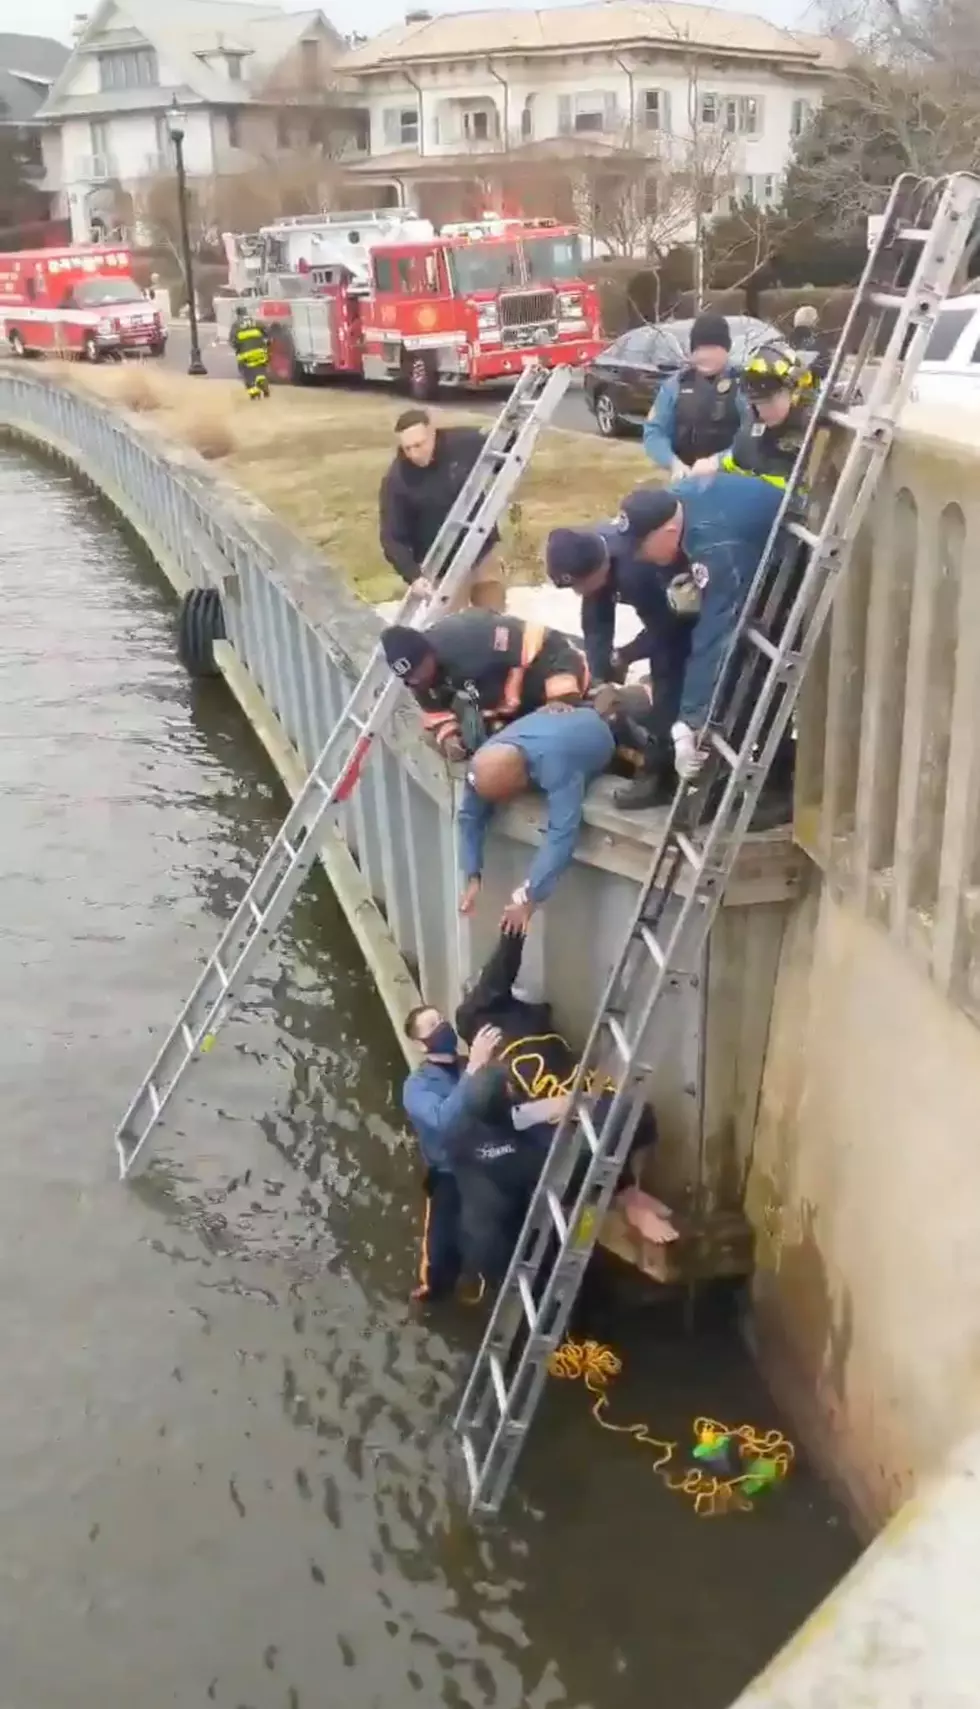 Deal Police, Allenhurst & Asbury Park firefighters rescue man trapped in Deal Lake